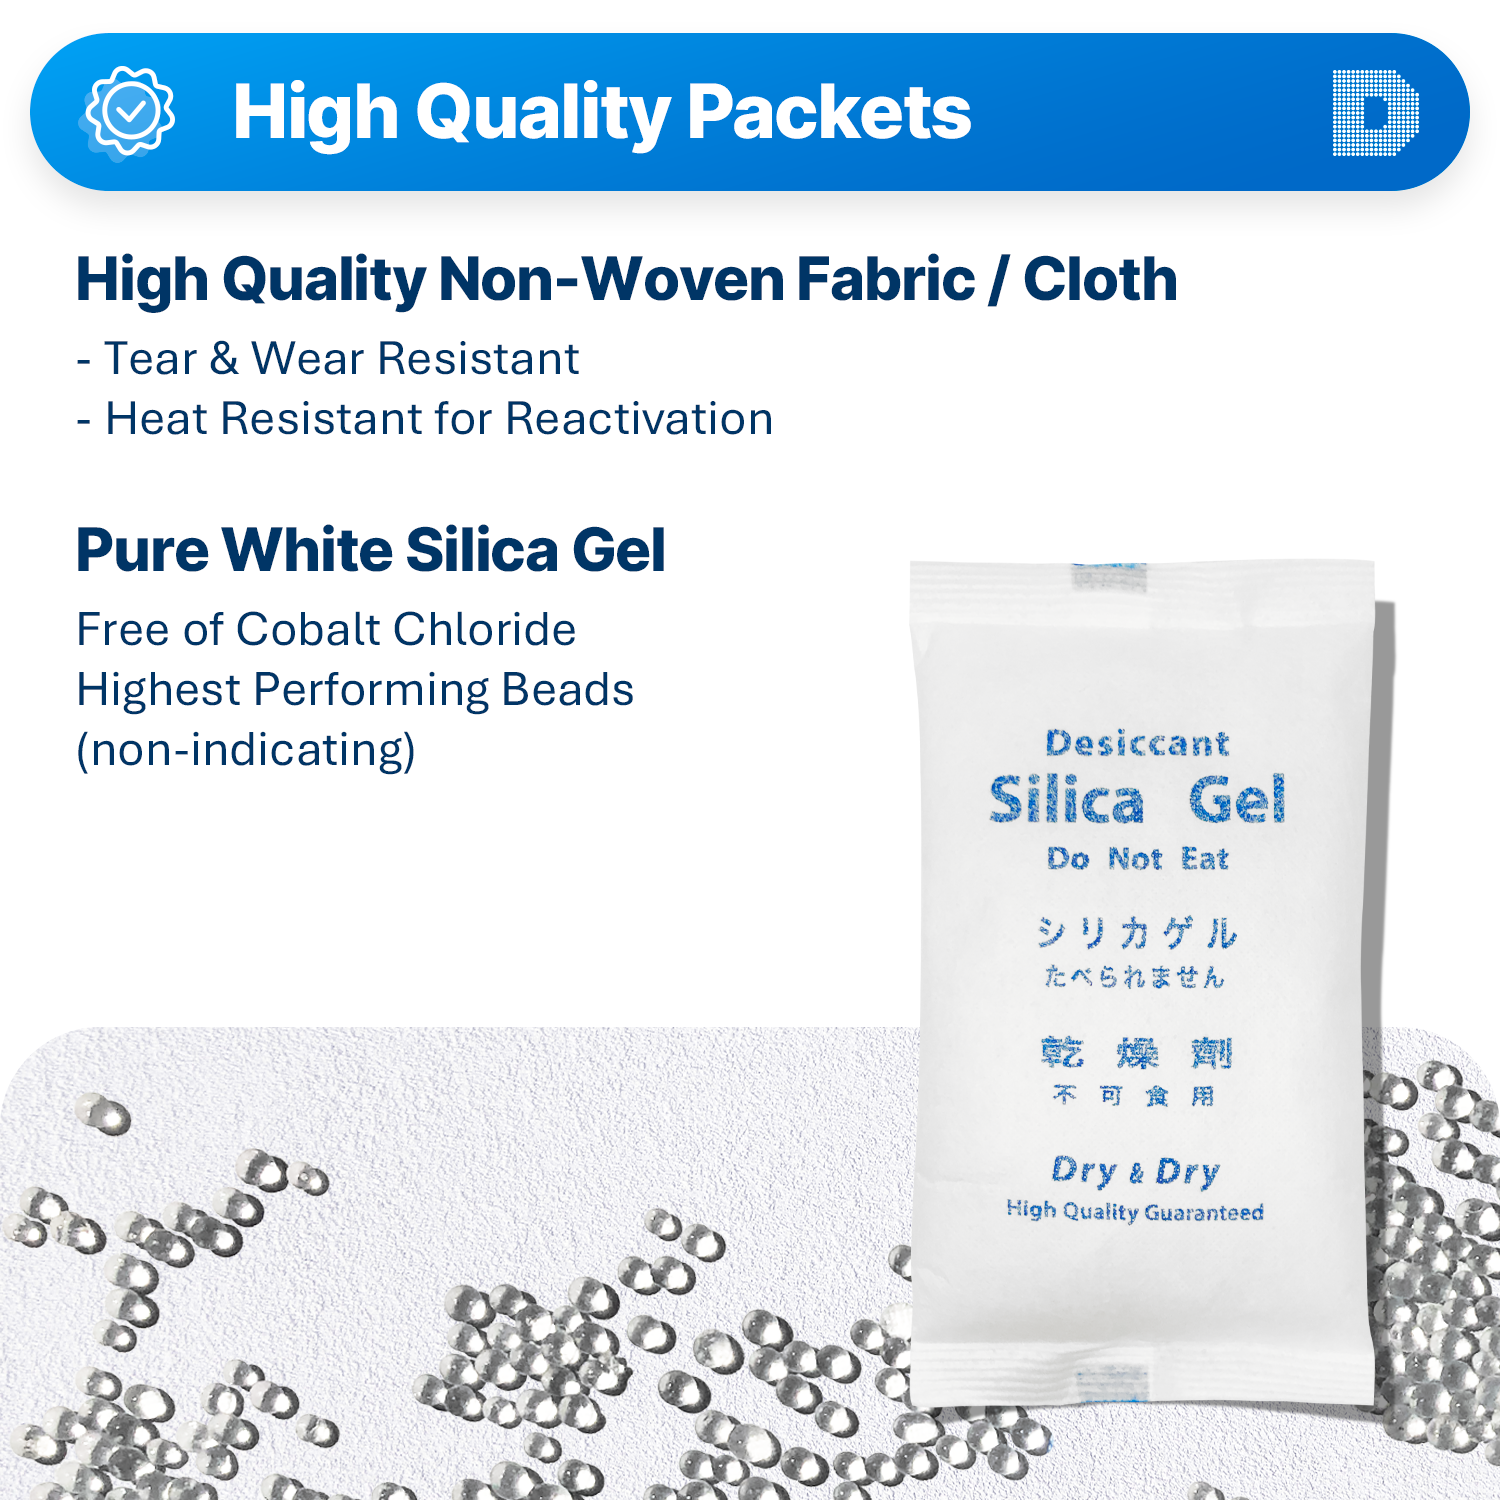 500 Gram [120 Packets]  "Dry & Dry" Premium Silica Gel Desiccant Packets - Rechargeable Non-Woven Fabric (Cloth)